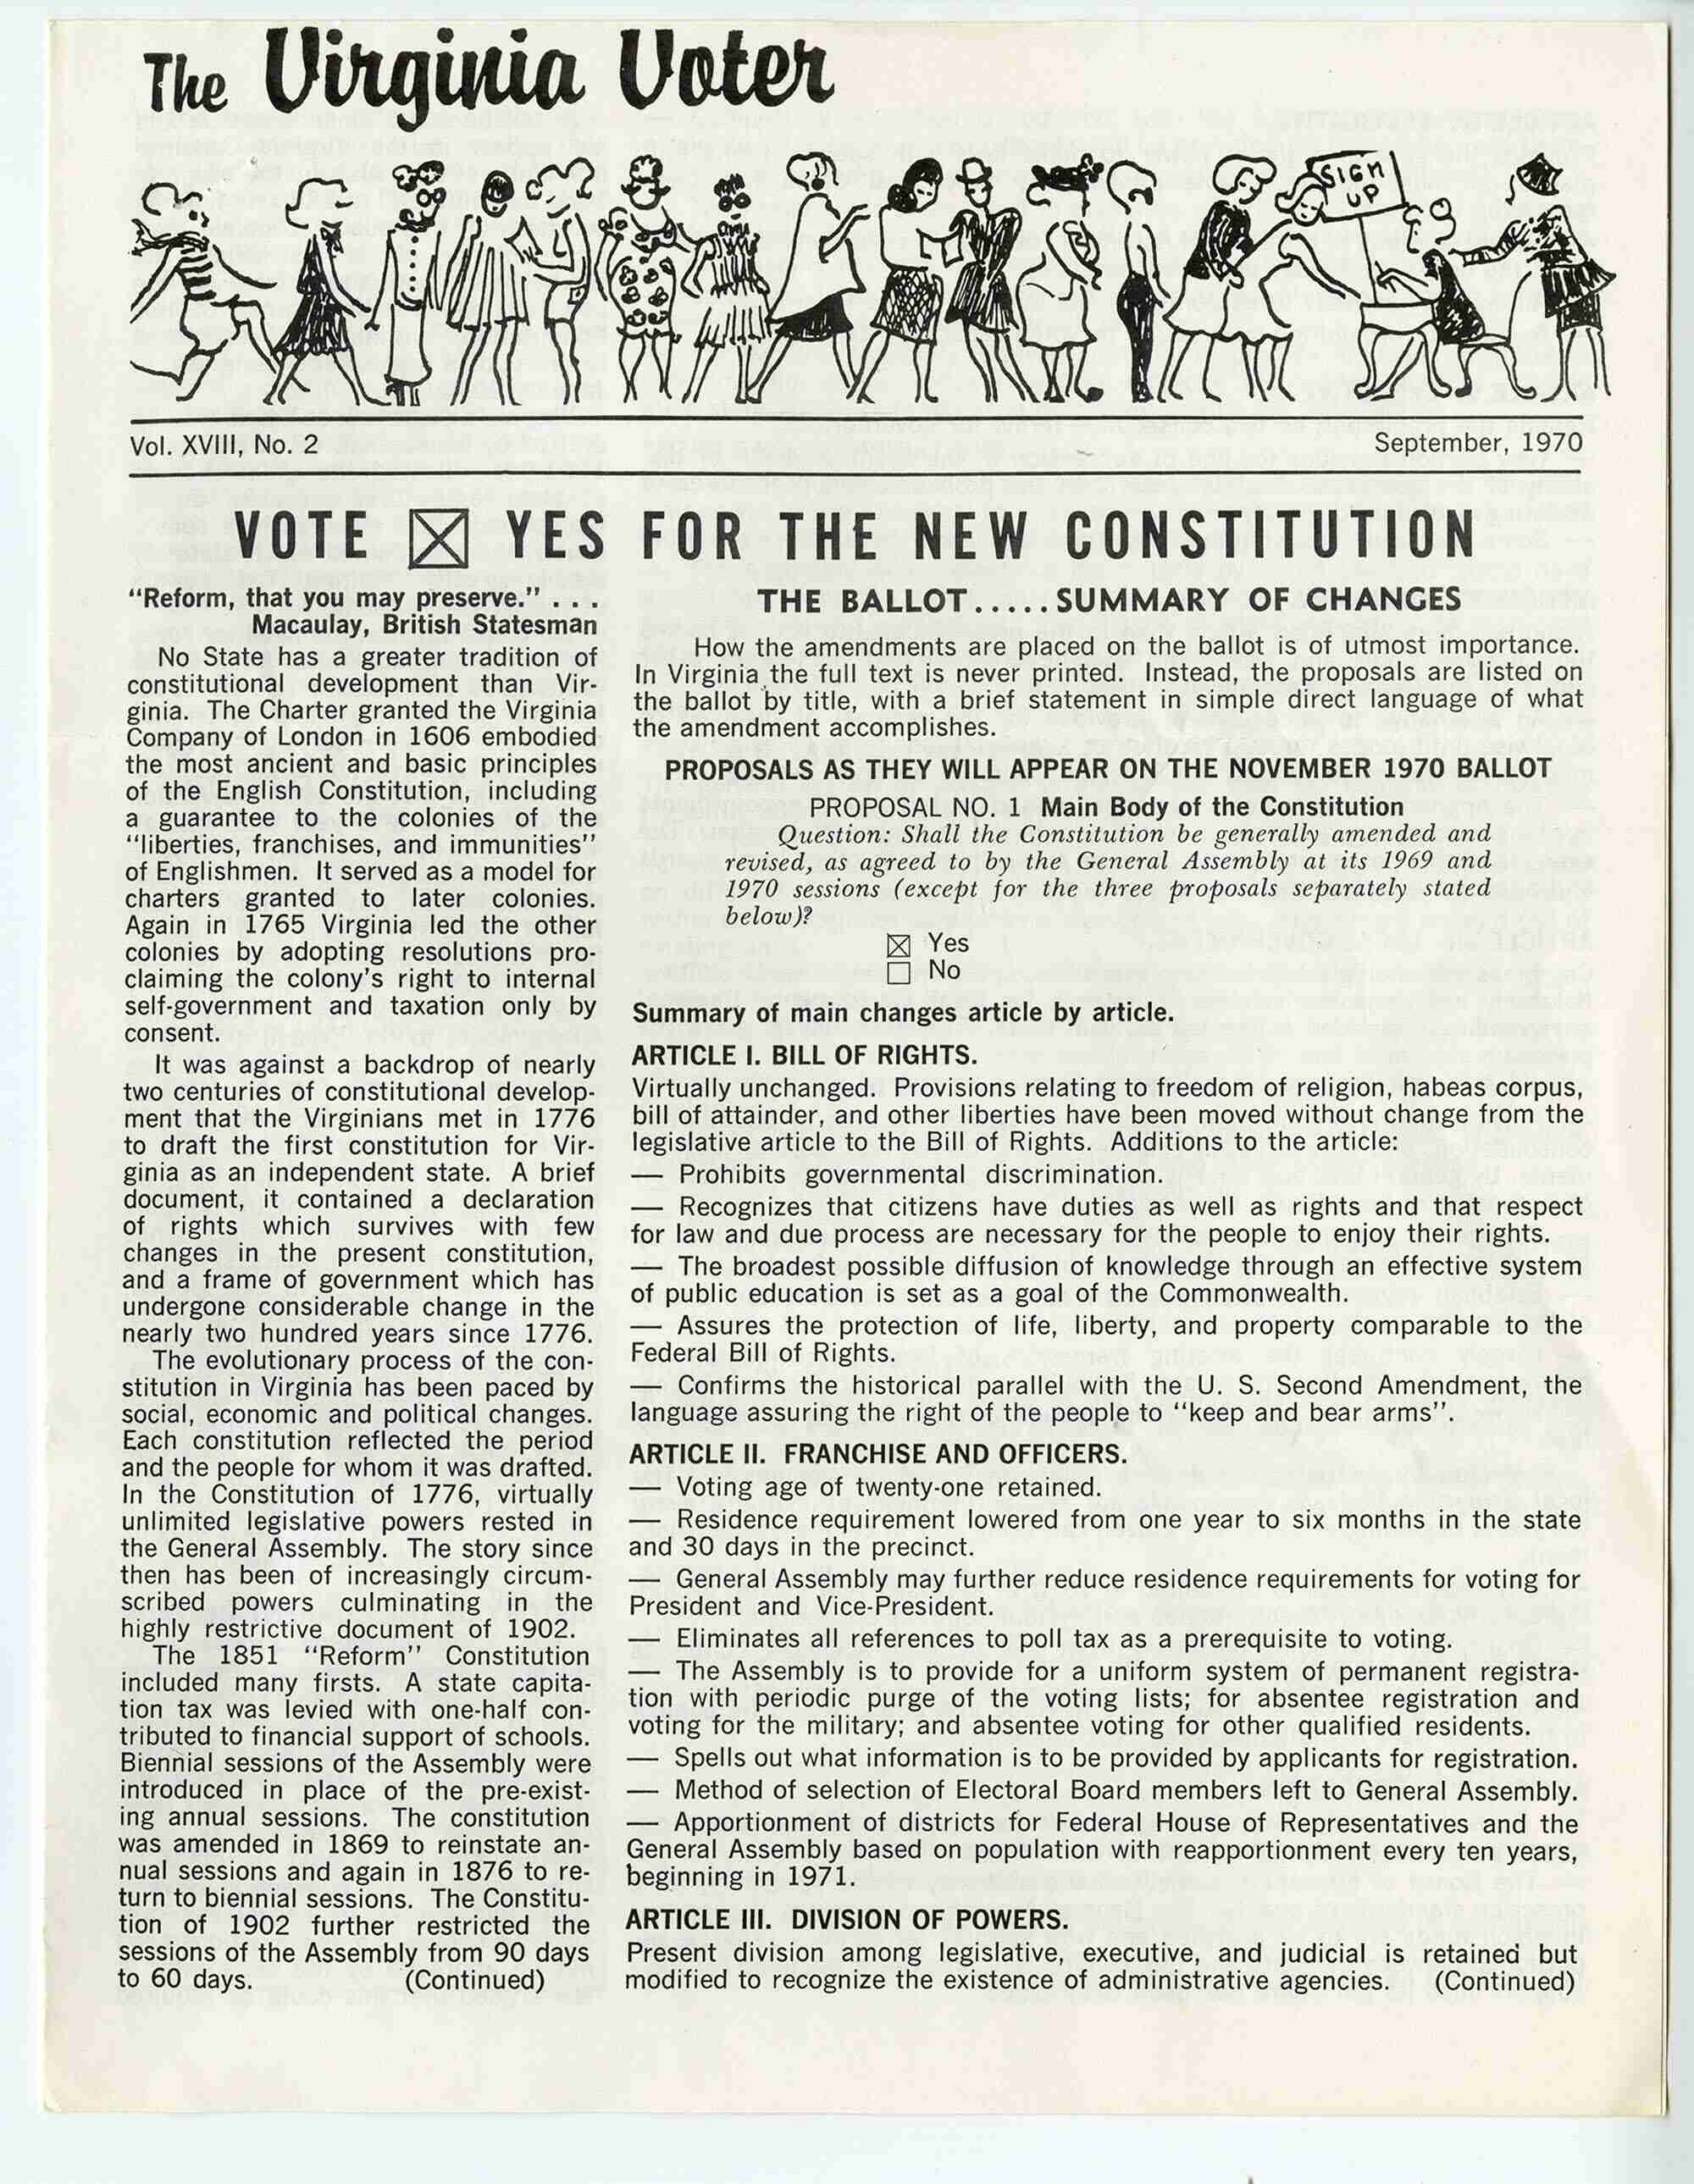 The Virginia Voter, Vol. XVIII, No. 2, September 1970. Published by The League of Women Voters of Virginia. From Virginia. Governor (1970–1974: Holton), Executive Papers, 1970–1974. Accessions 28050, Box 40, 'Before Inauguration' Folder. Library of Virginia.